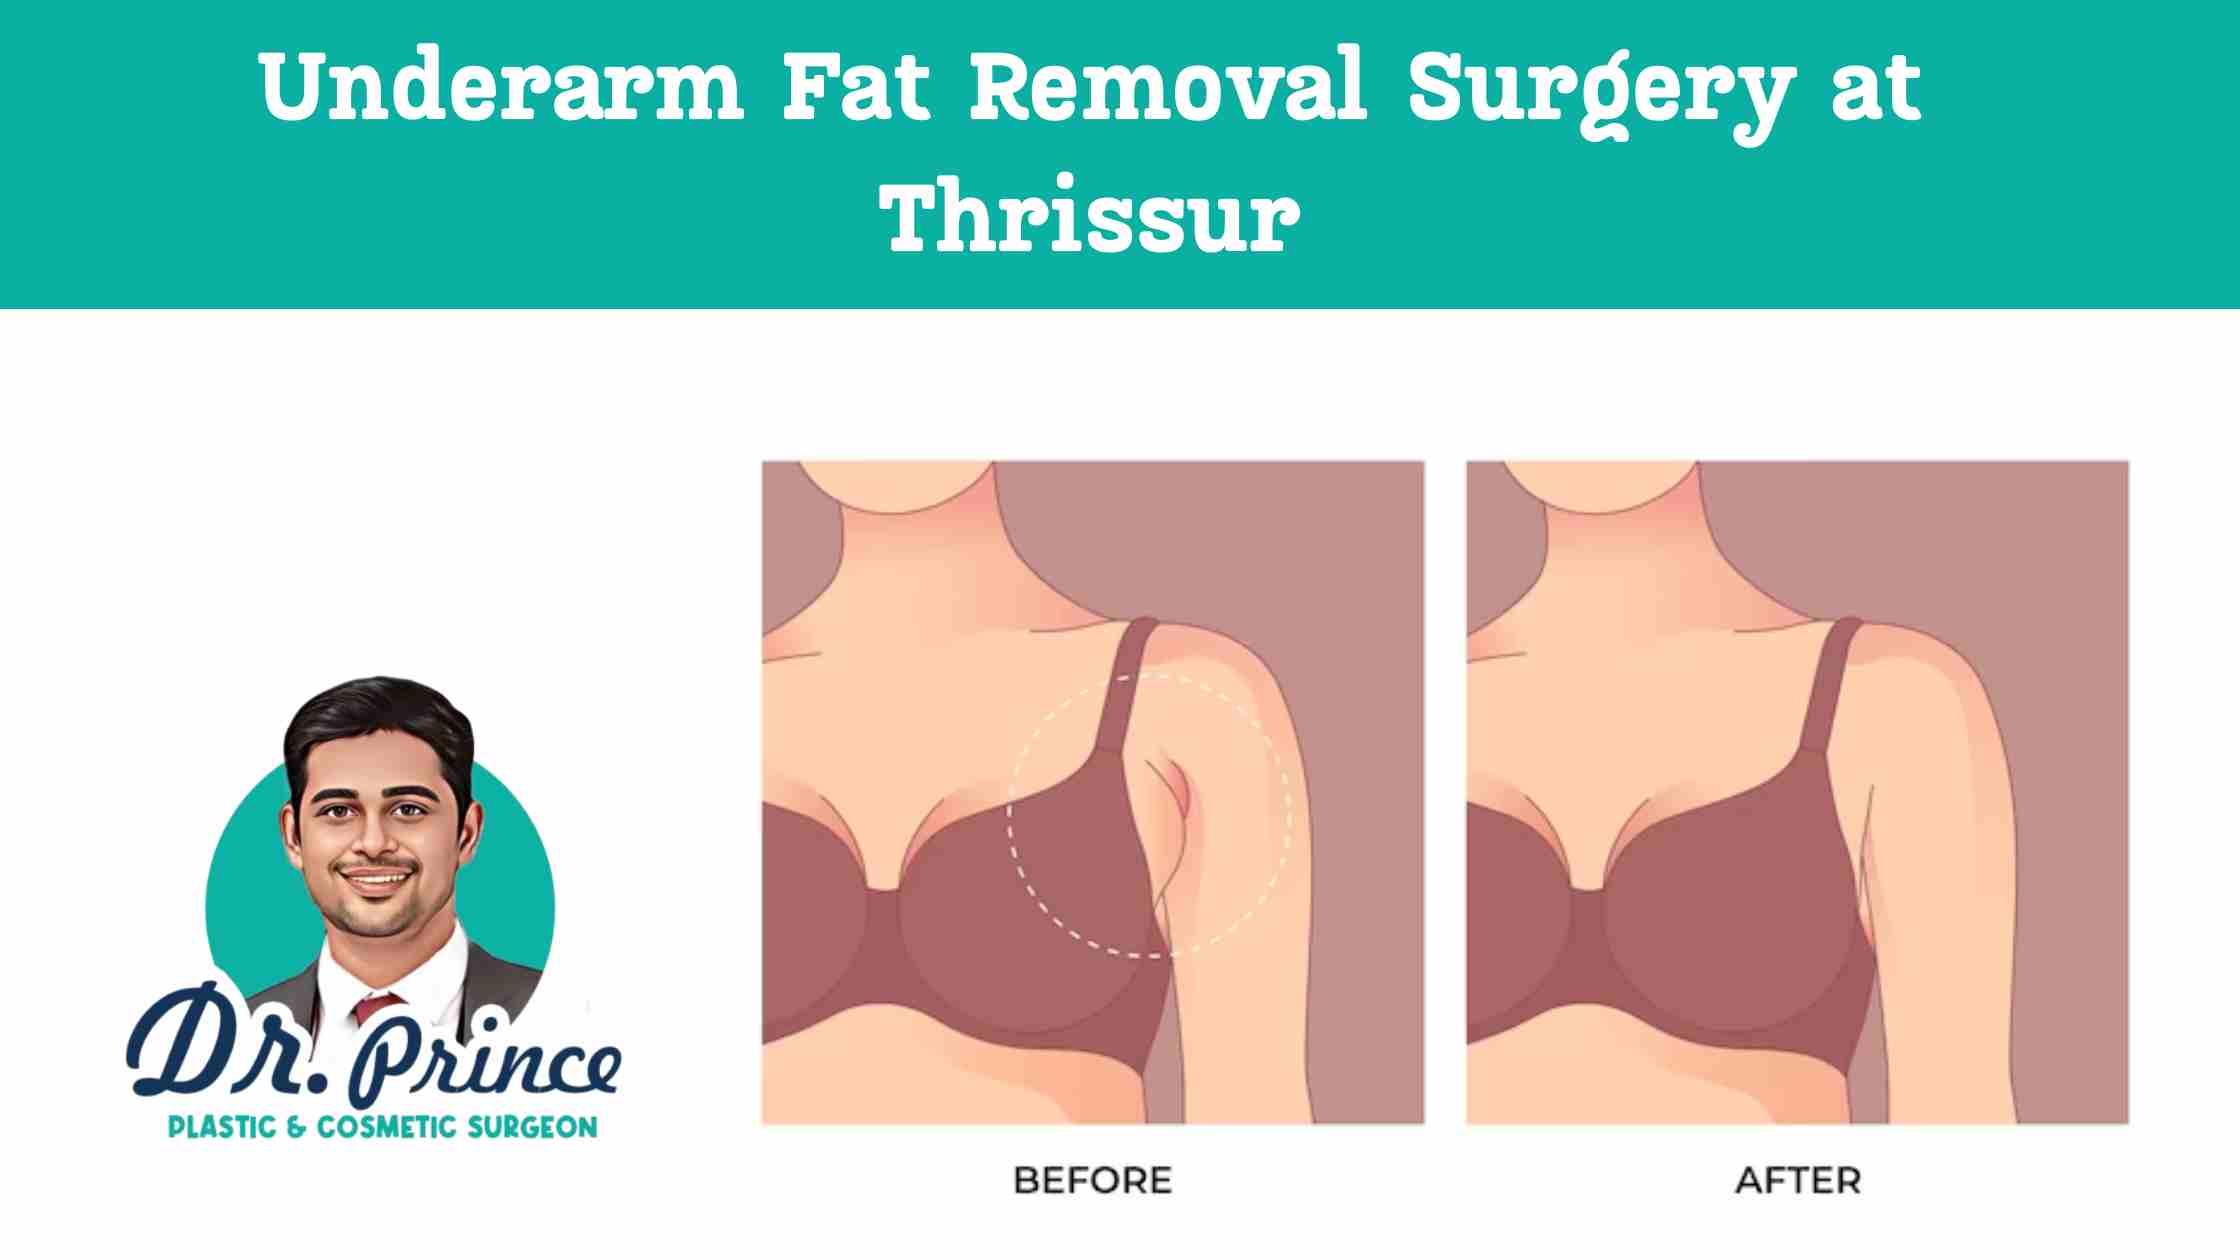 Underarm Fat Removal Surgery - Dr. Prince at Sushrutha Institute of Plastic Surgery, Thrissur.